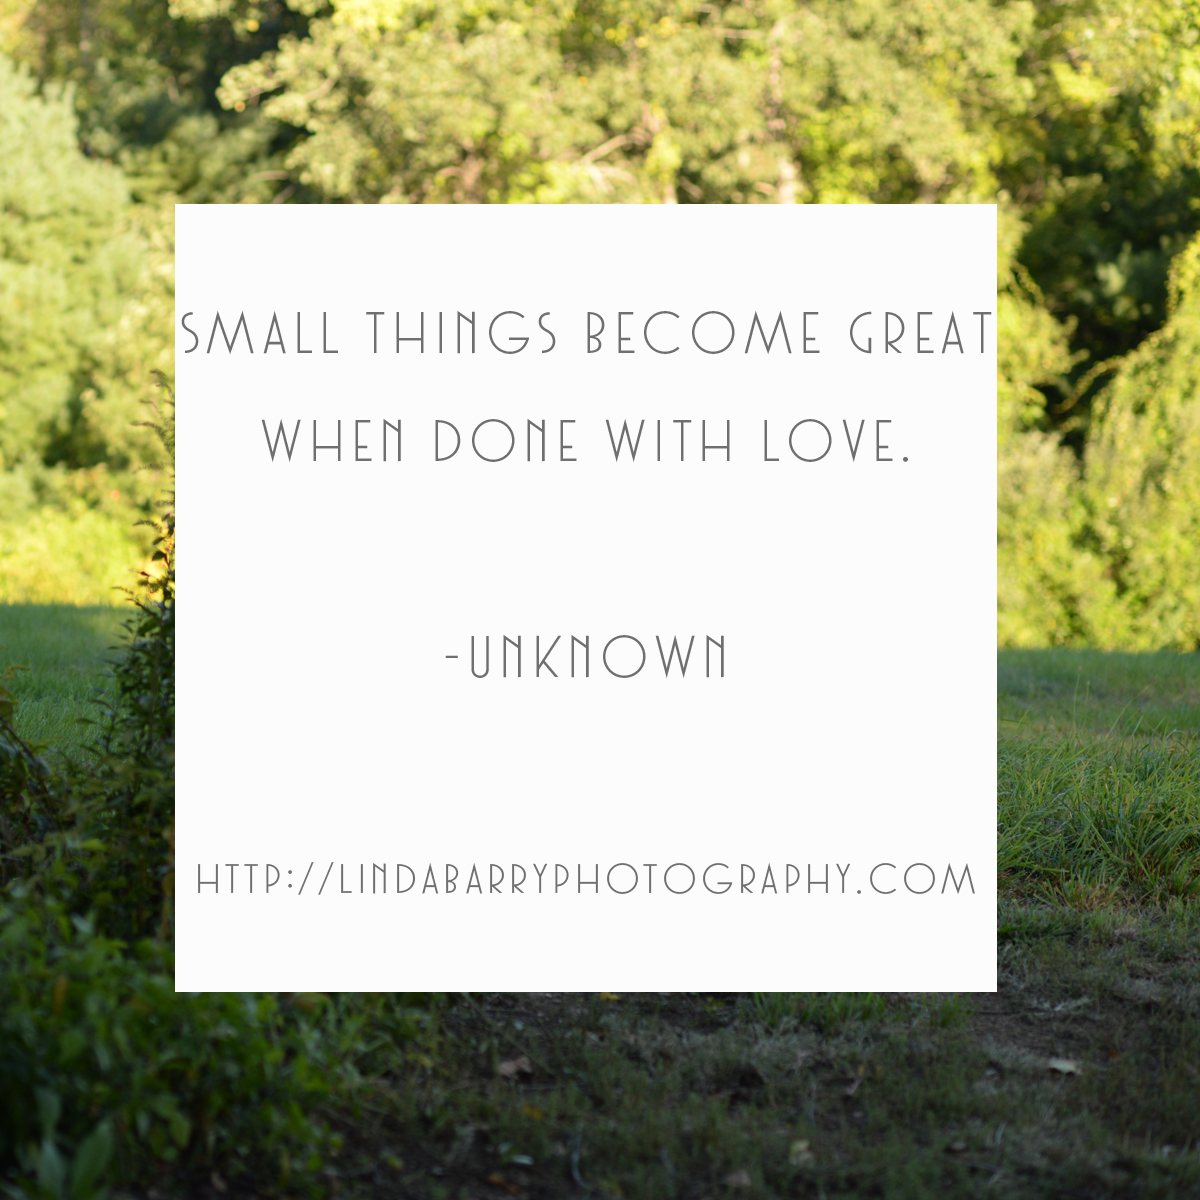 Small things become great things when done with love. Inspirational quote.